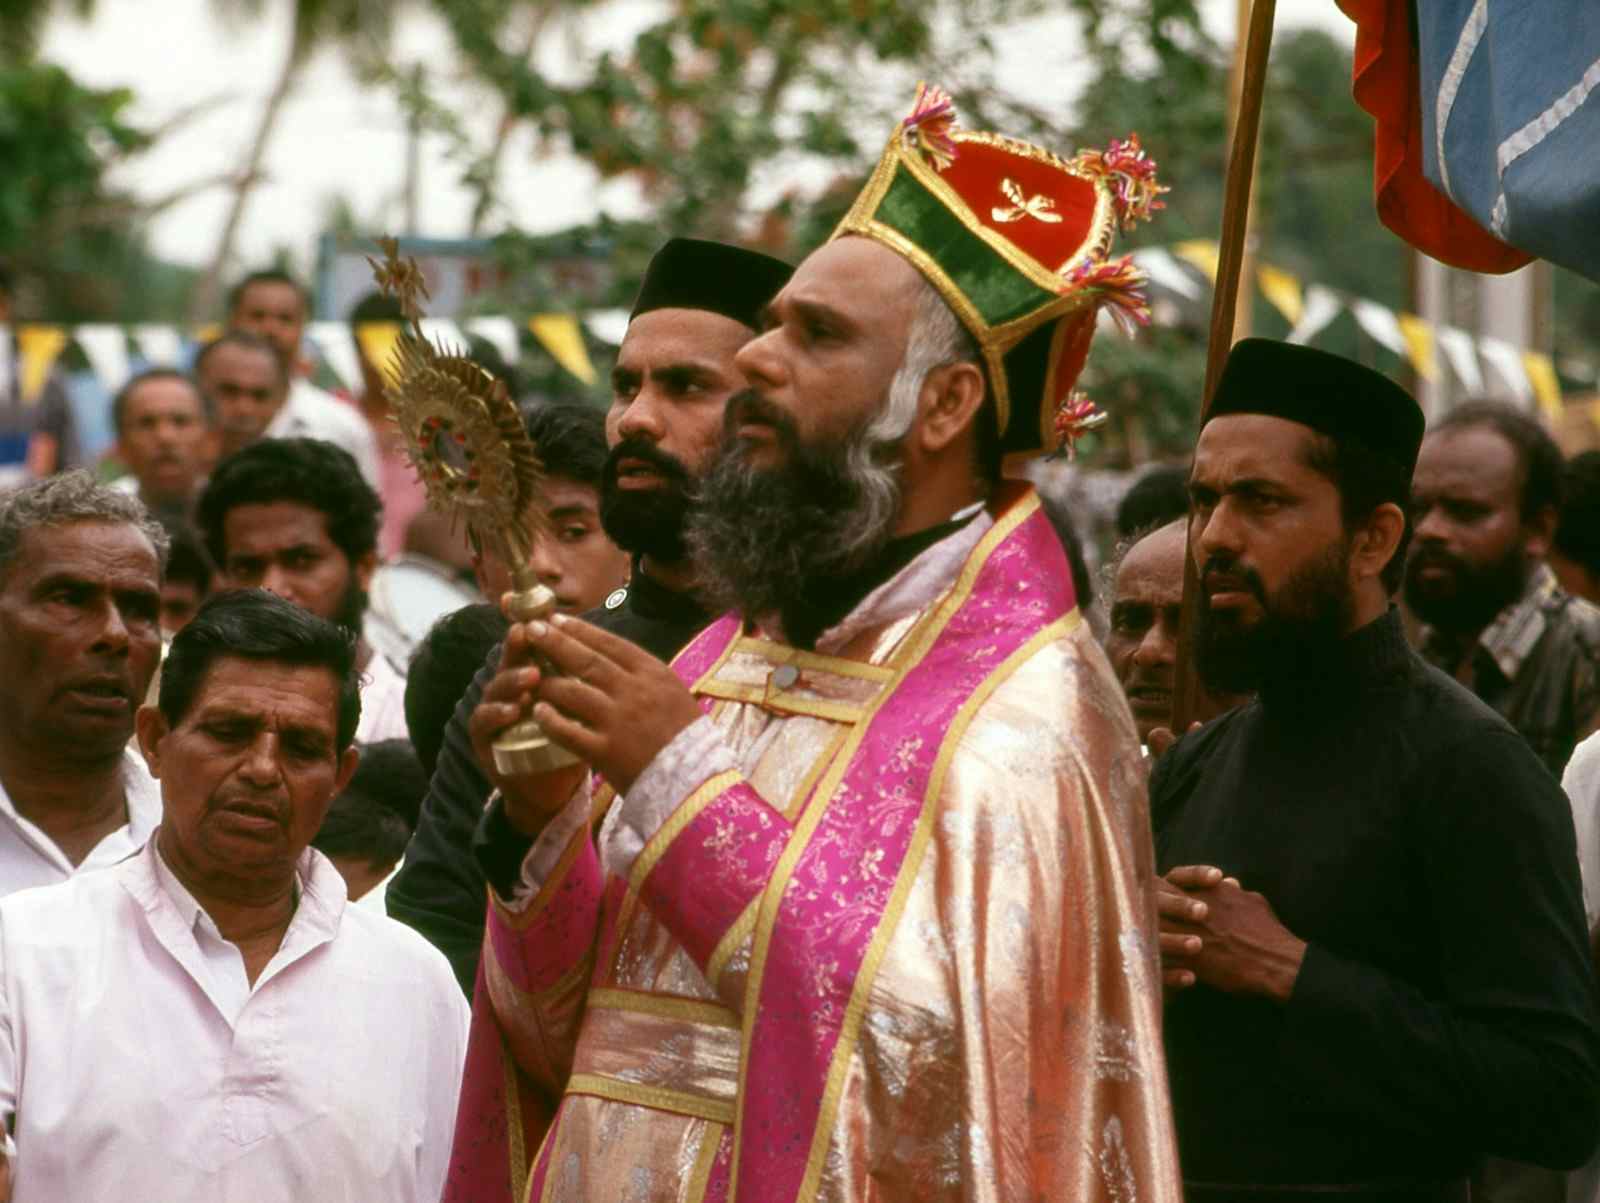 A Syrian Orthodox Christian priest celebrates Saint George's Day in Kottayam, Kerala. The Malankara Orthodox Syrian Church is a church based in Kerala, India. According to tradition, the church originated in the missions of Thomas the Apostle in the 1st century CE. (Rainer Krack/Pictures From History/Universal Images Group via Getty Images)